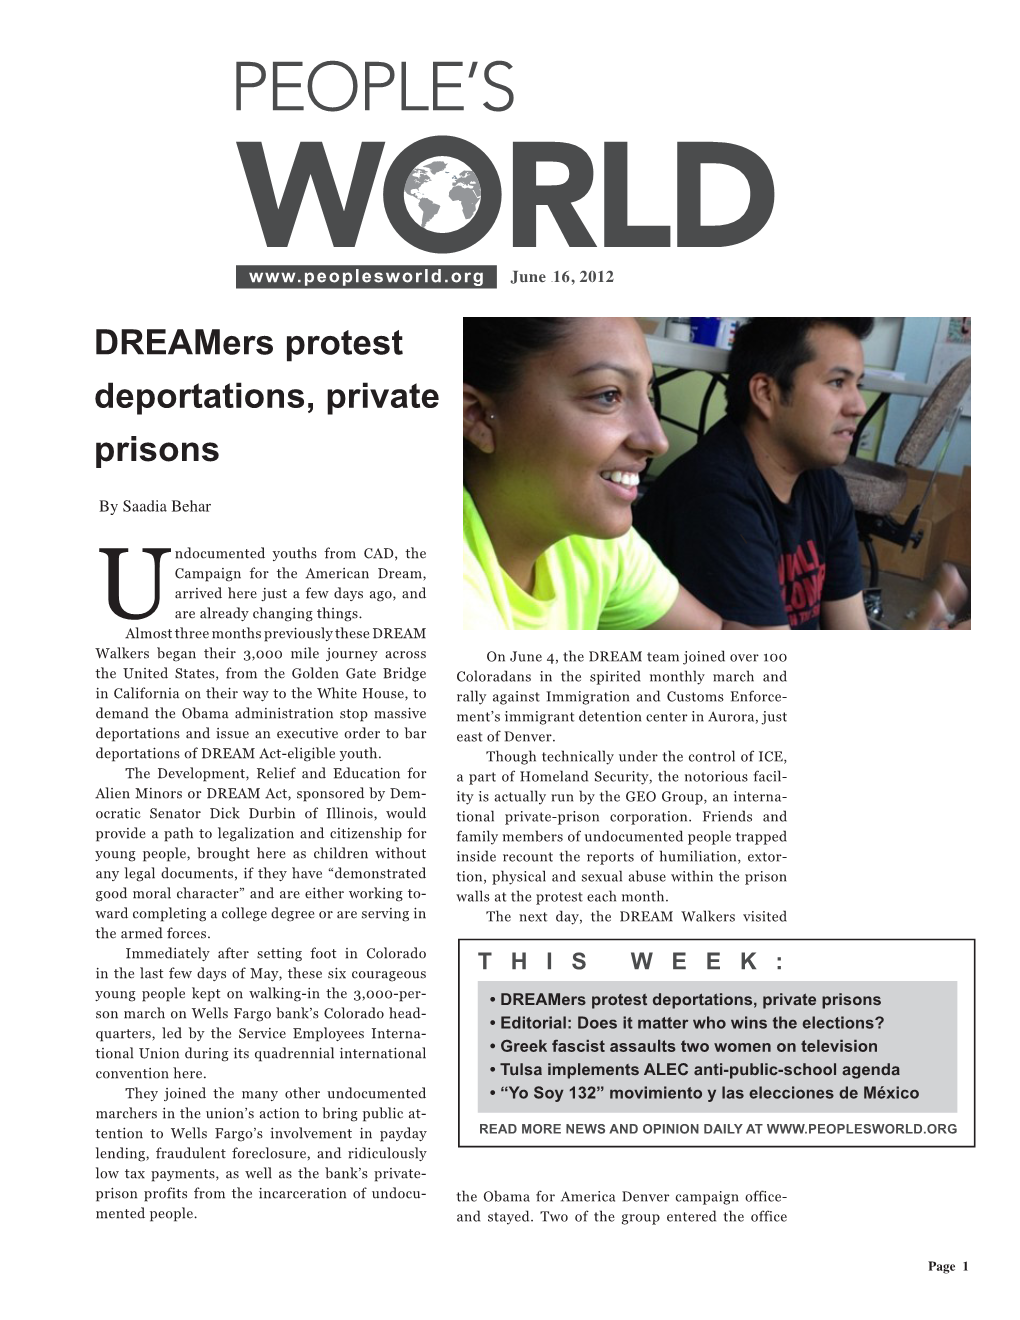 Dreamers Protest Deportations, Private Prisons